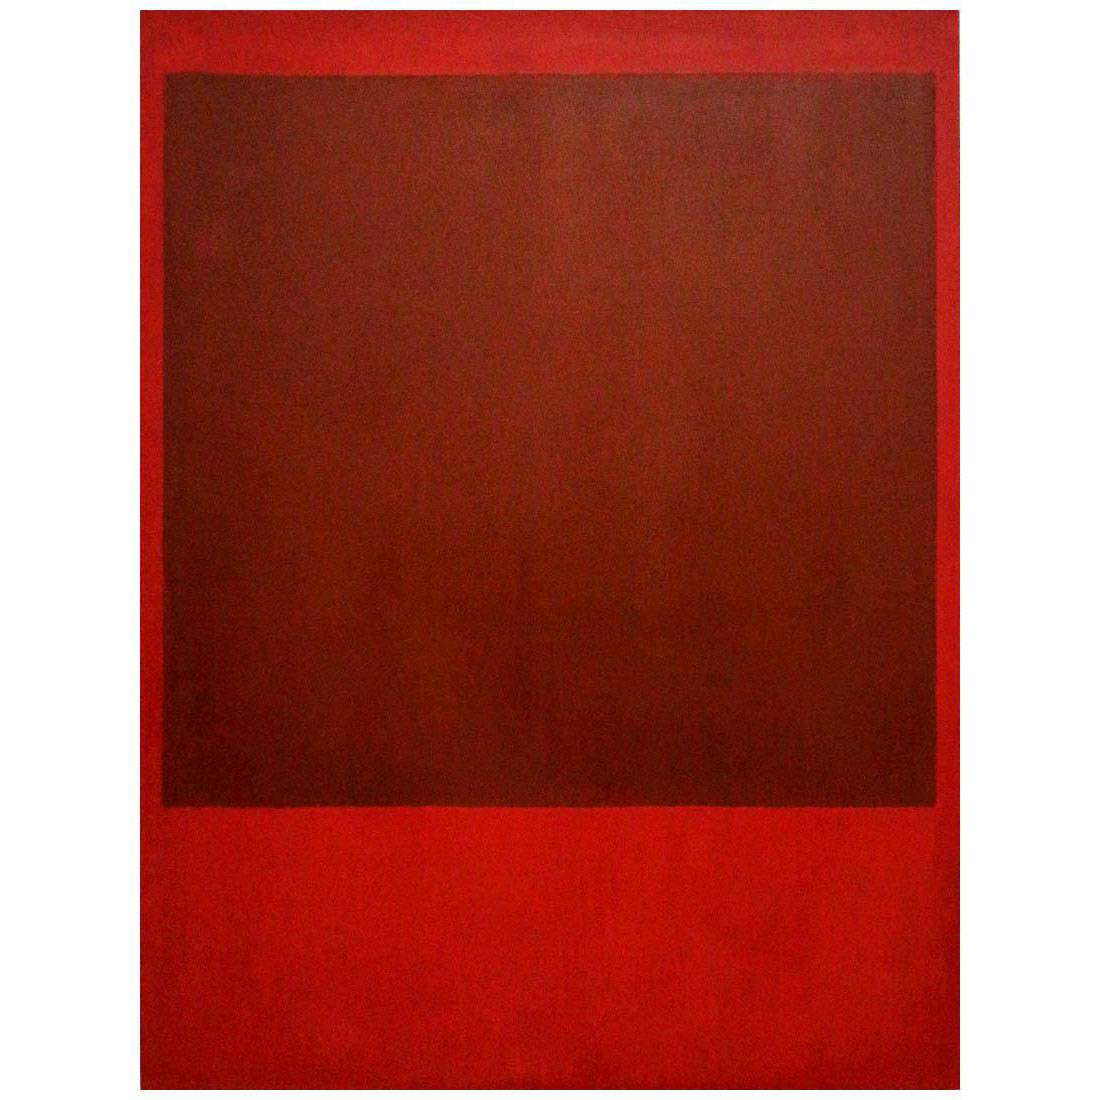 Mark Rothko. Untitled. Brown, Red. 1960